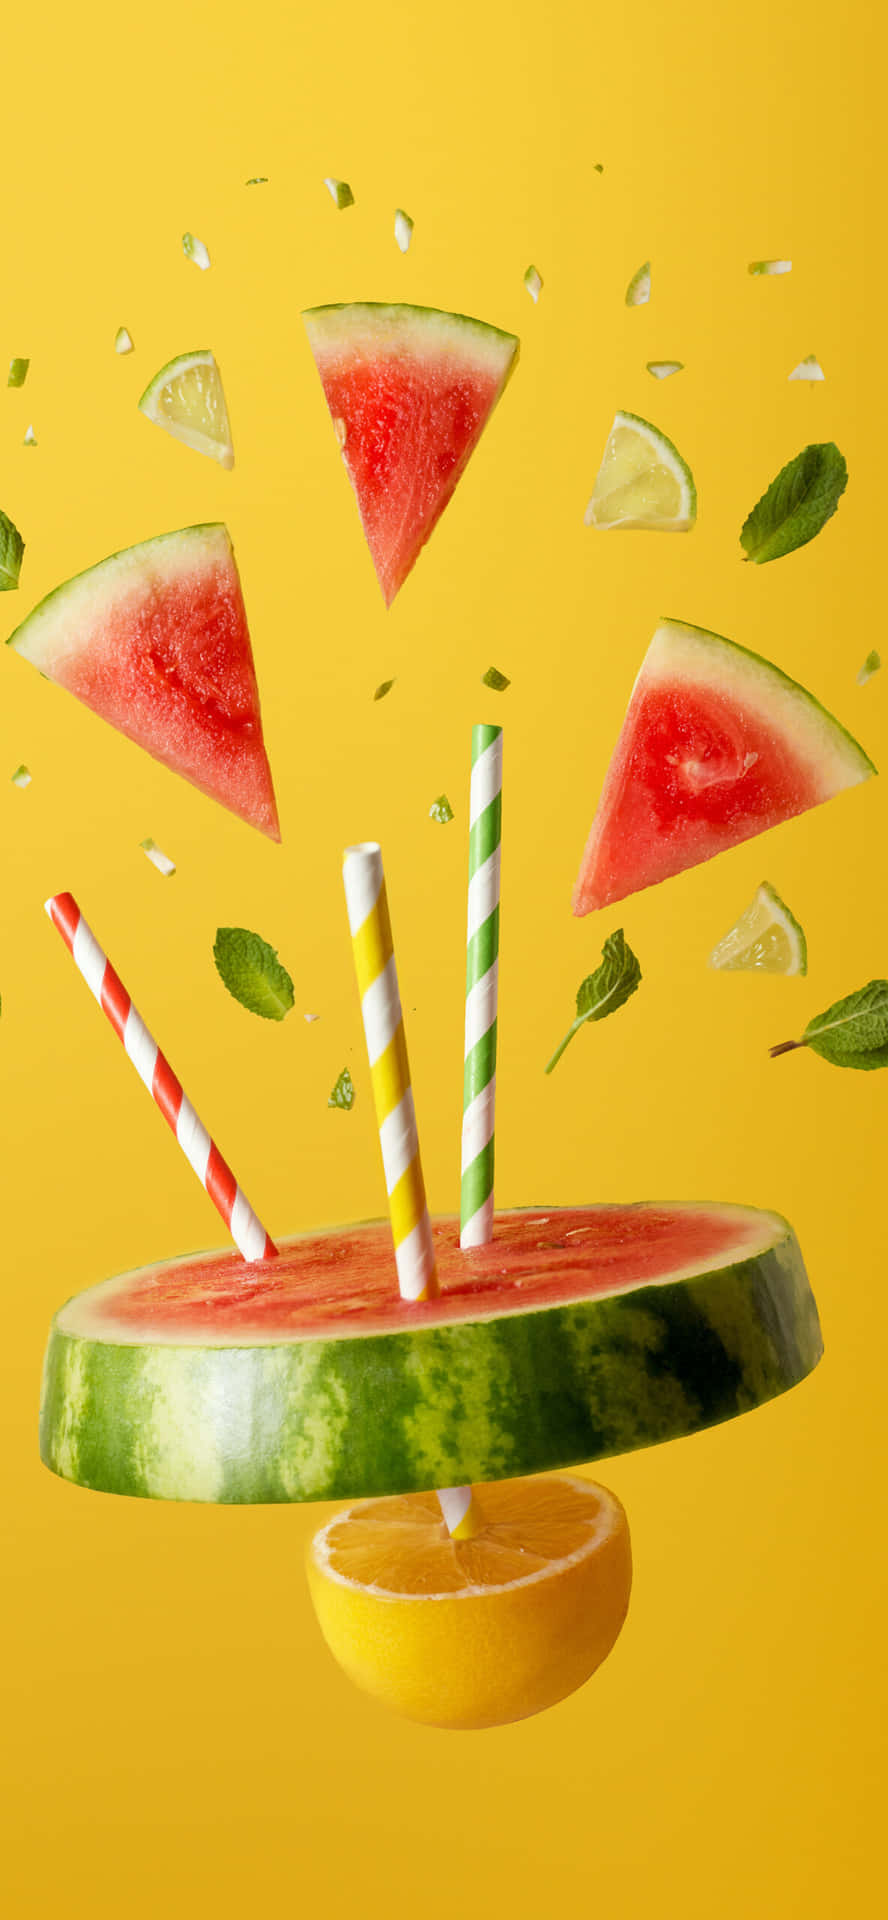 Enjoy a Watermelon Iphone background and jazz up your home screen! Wallpaper